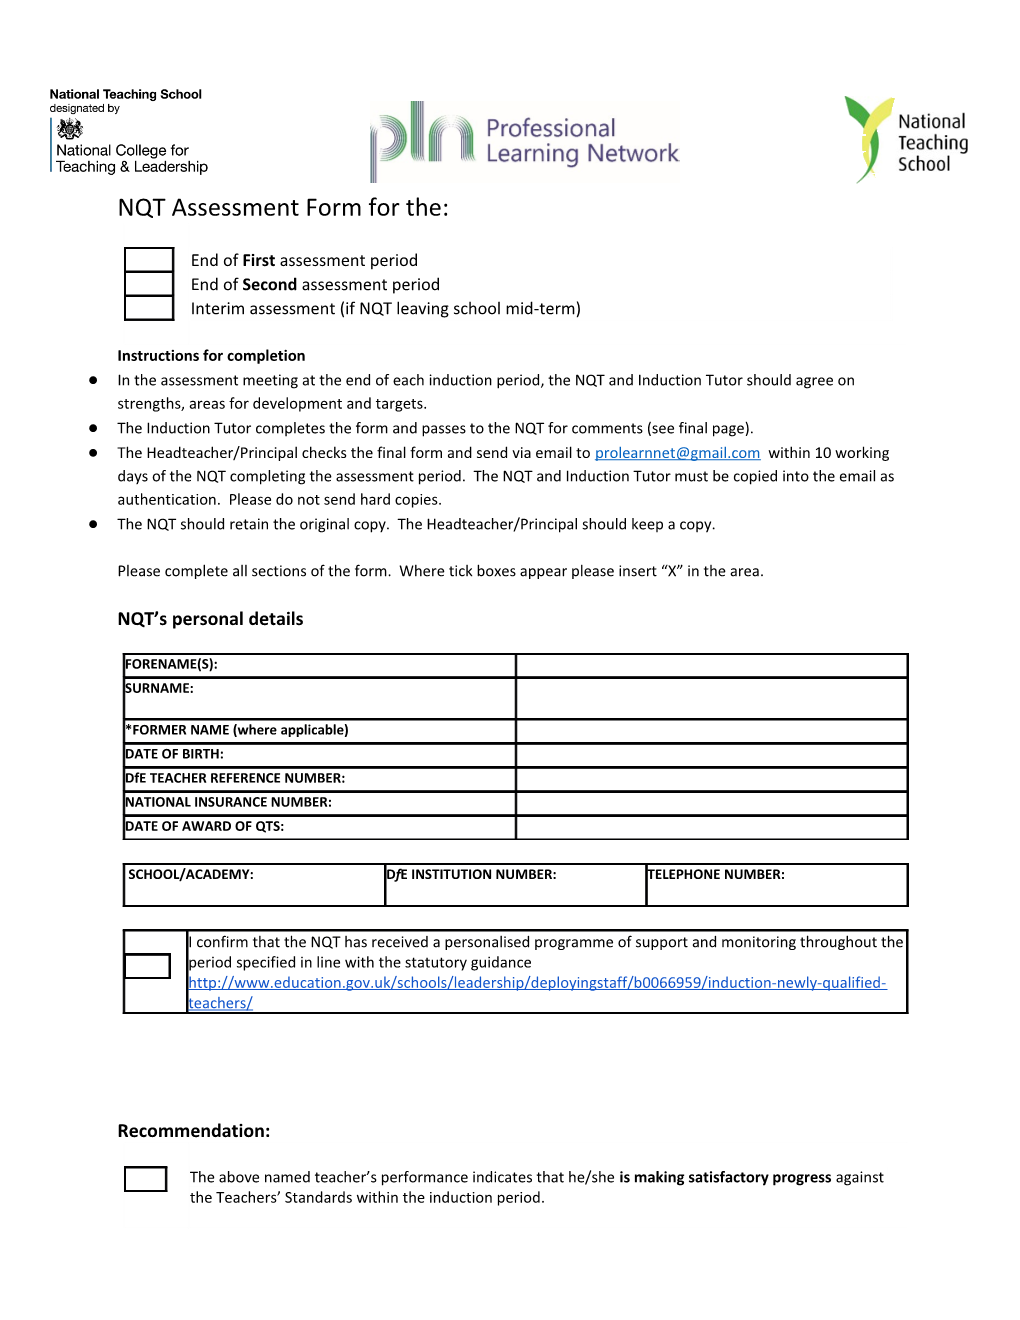 NQT Assessment Form for The